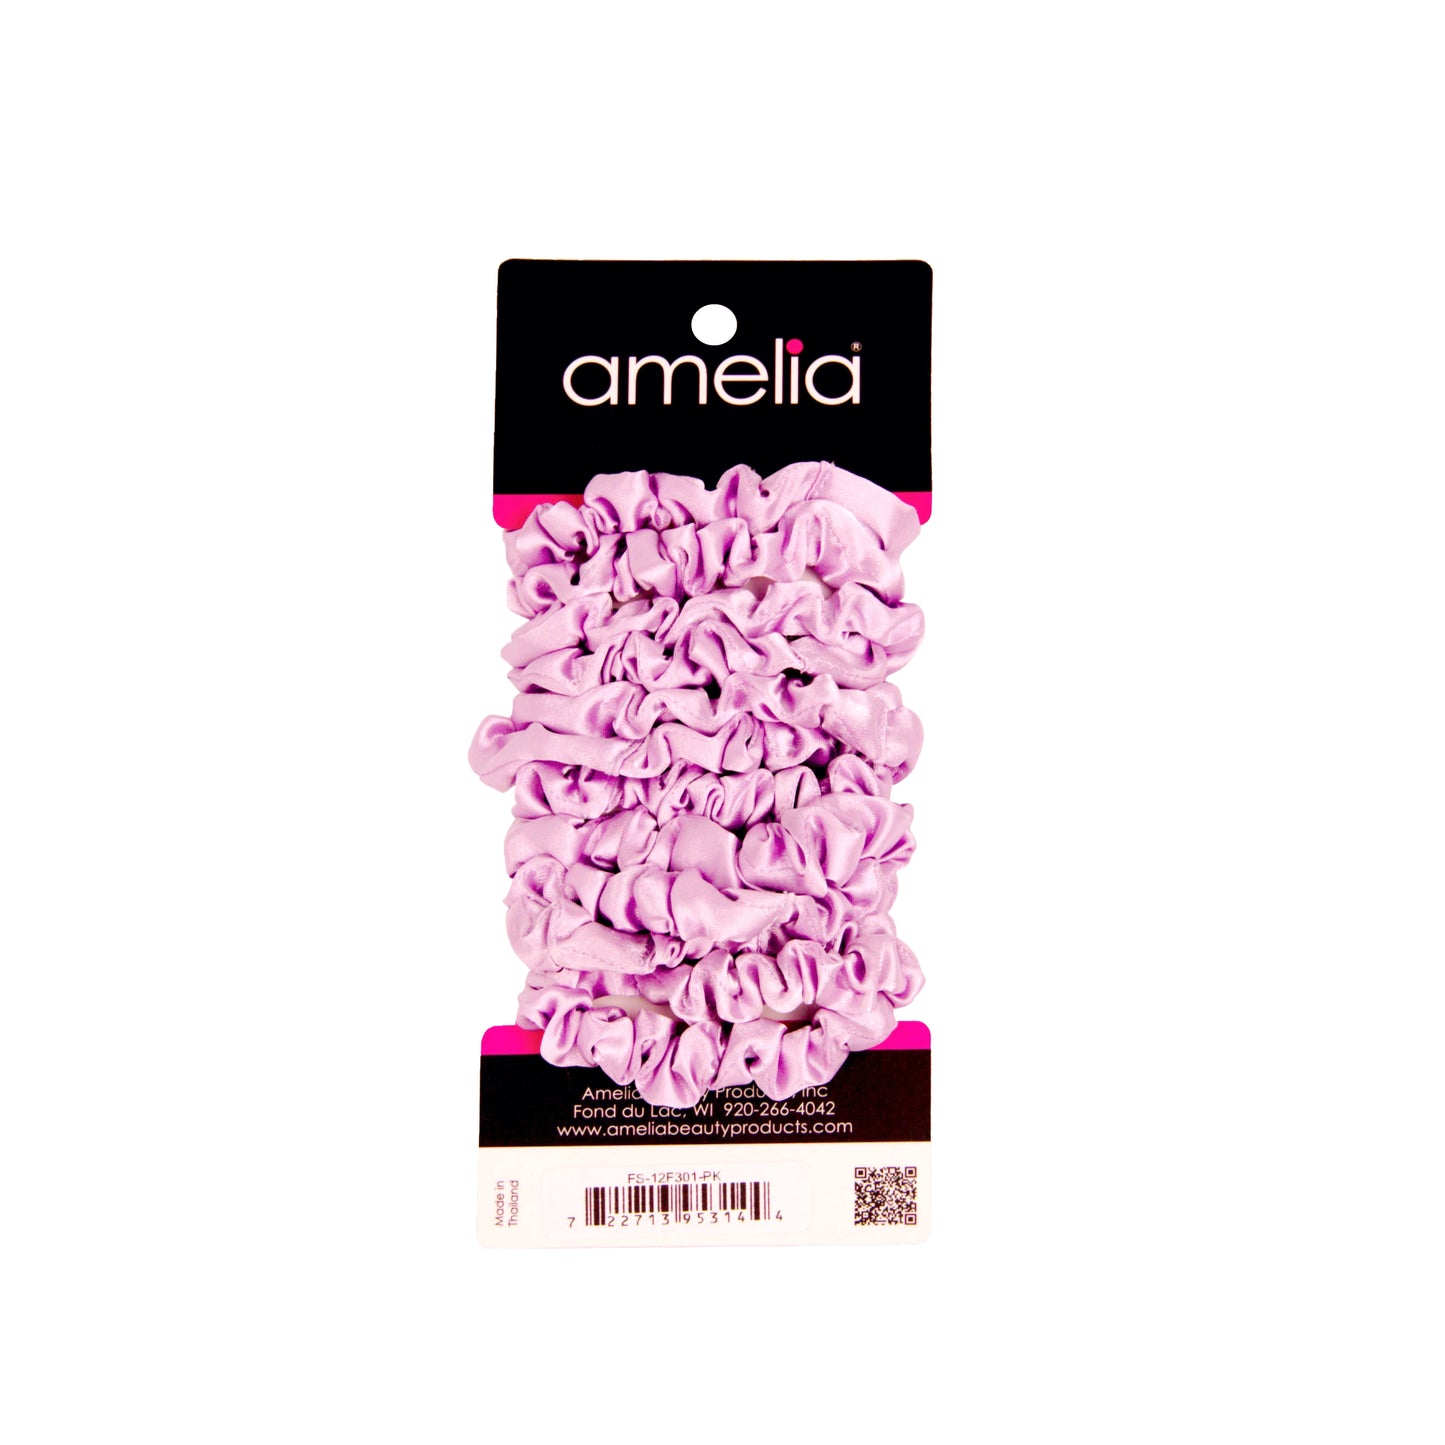 Amelia Beauty, Pink Satin Scrunchies, 2.25in Diameter, Gentle on Hair, Strong Hold, No Snag, No Dents or Creases. 12 Pack